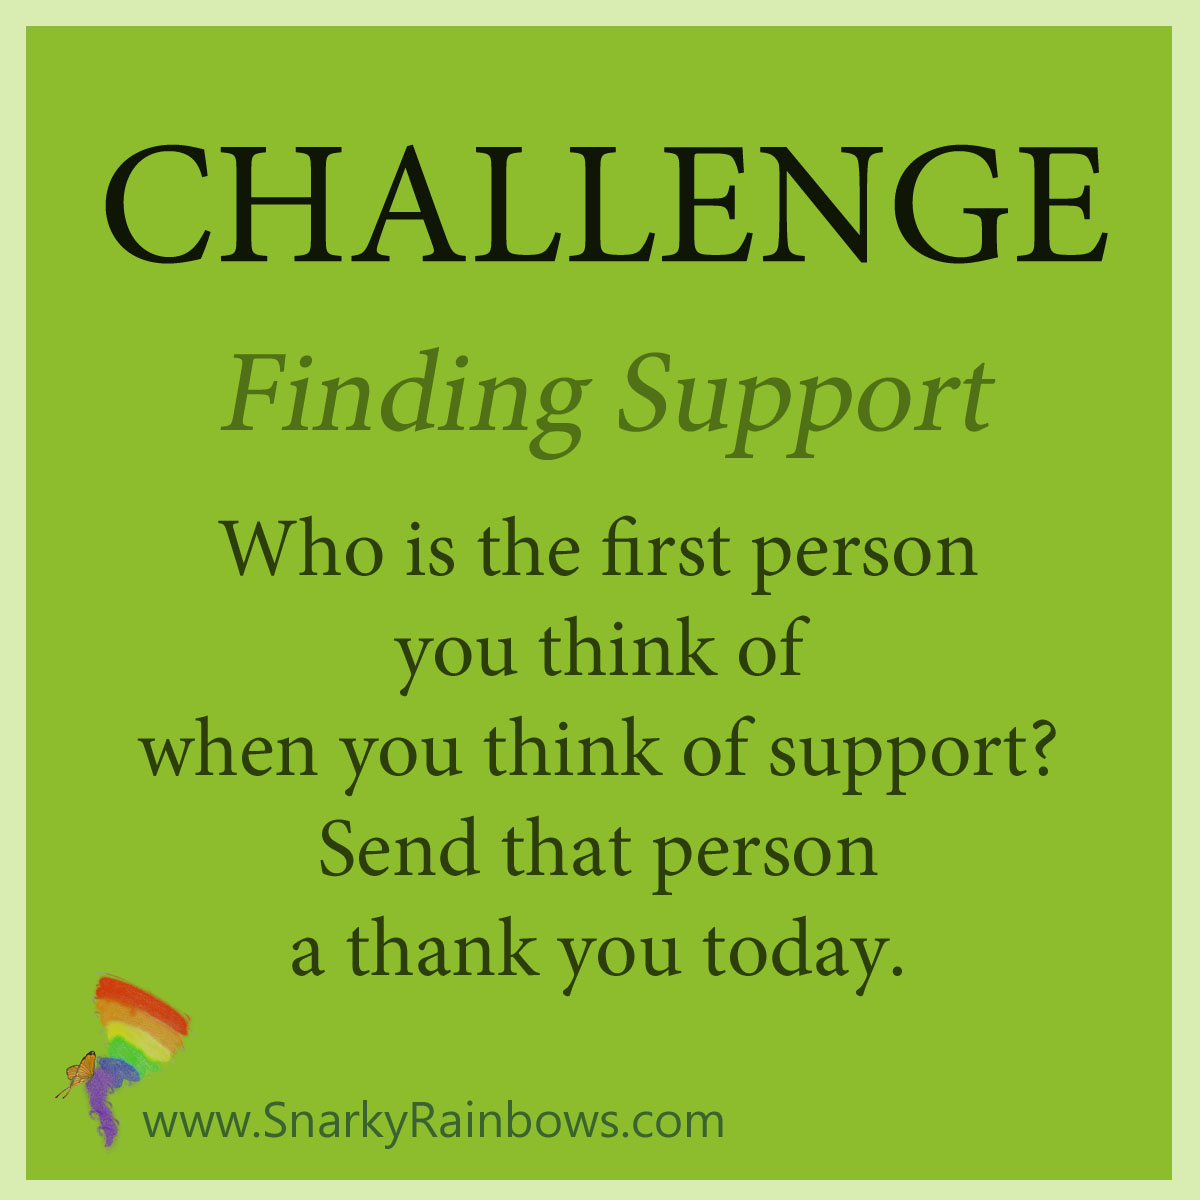 Challenge for Oct 18 - find support